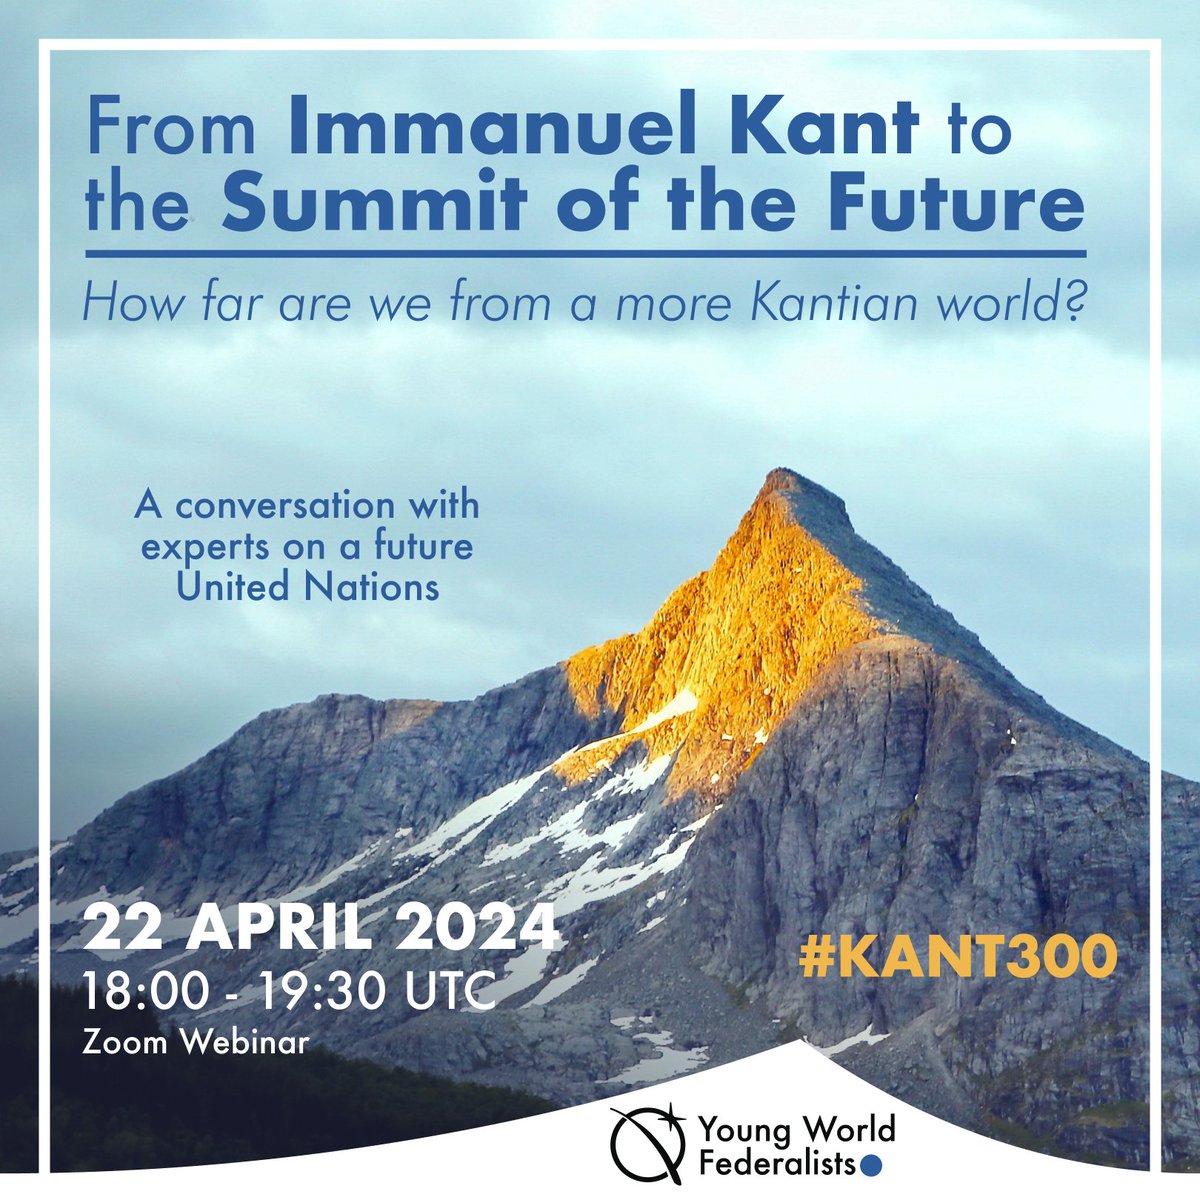 🇺🇳The UN is starting a very rare review and reform process called the Summit of the Future. To celebrate Kant's 300th birthday, we're sitting down with four global governance experts to bridge the gap between Kant's vision and our reality. Sign up👇 bit.ly/kant300